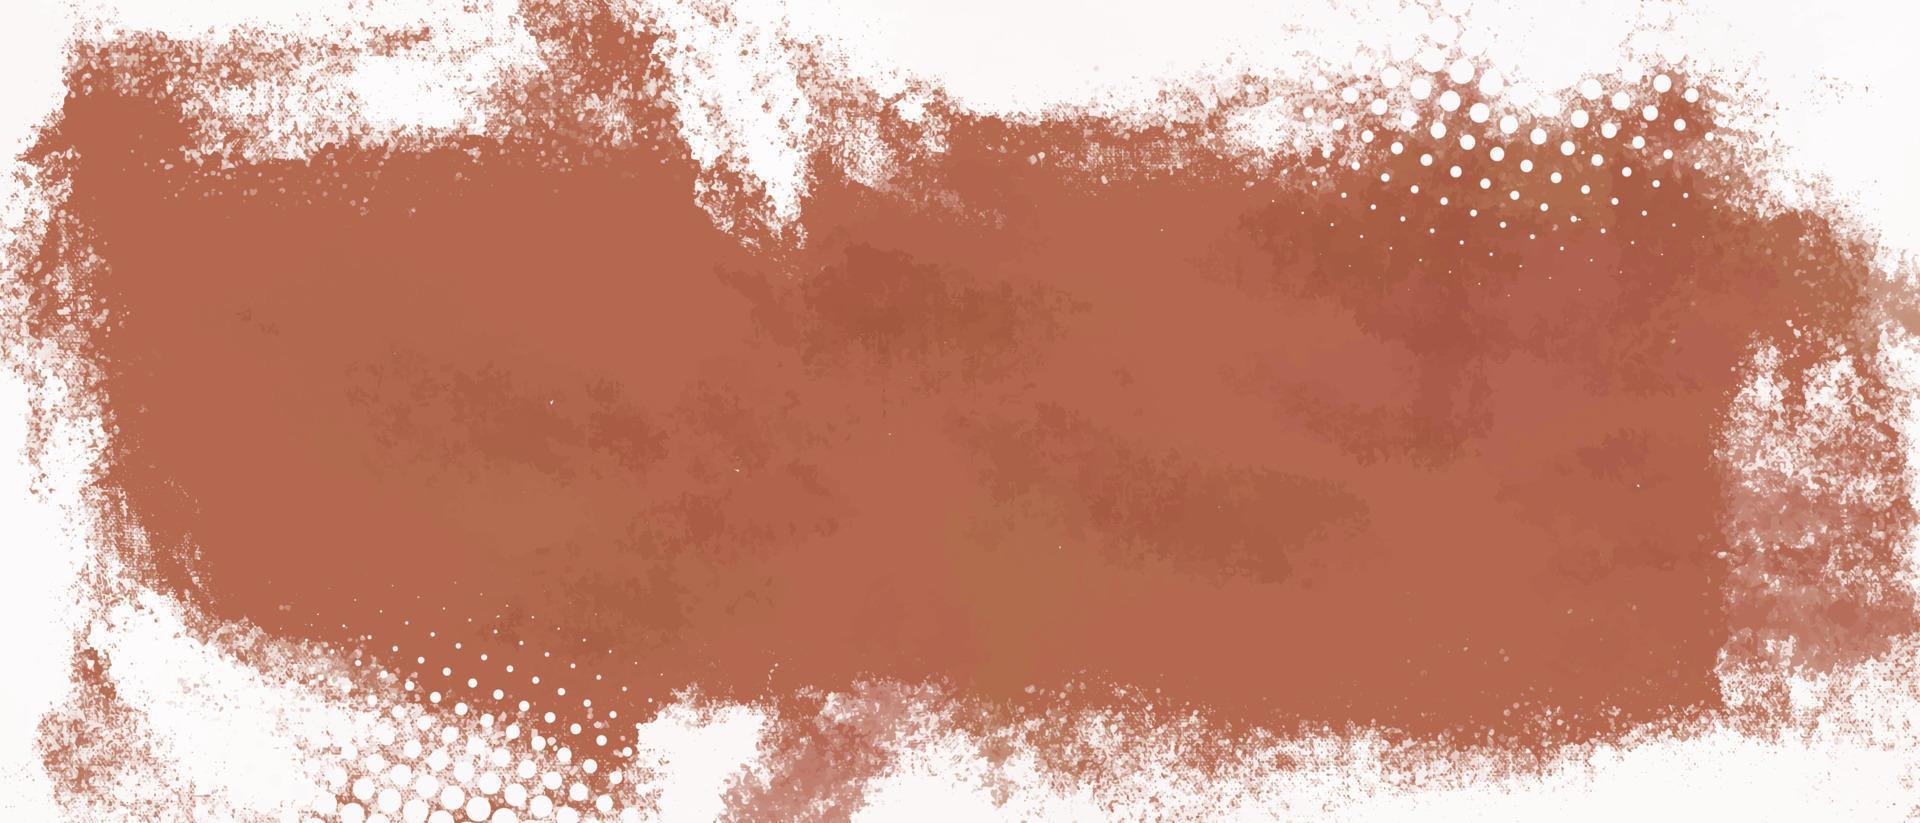 White and brown dirty grunge texture background vector